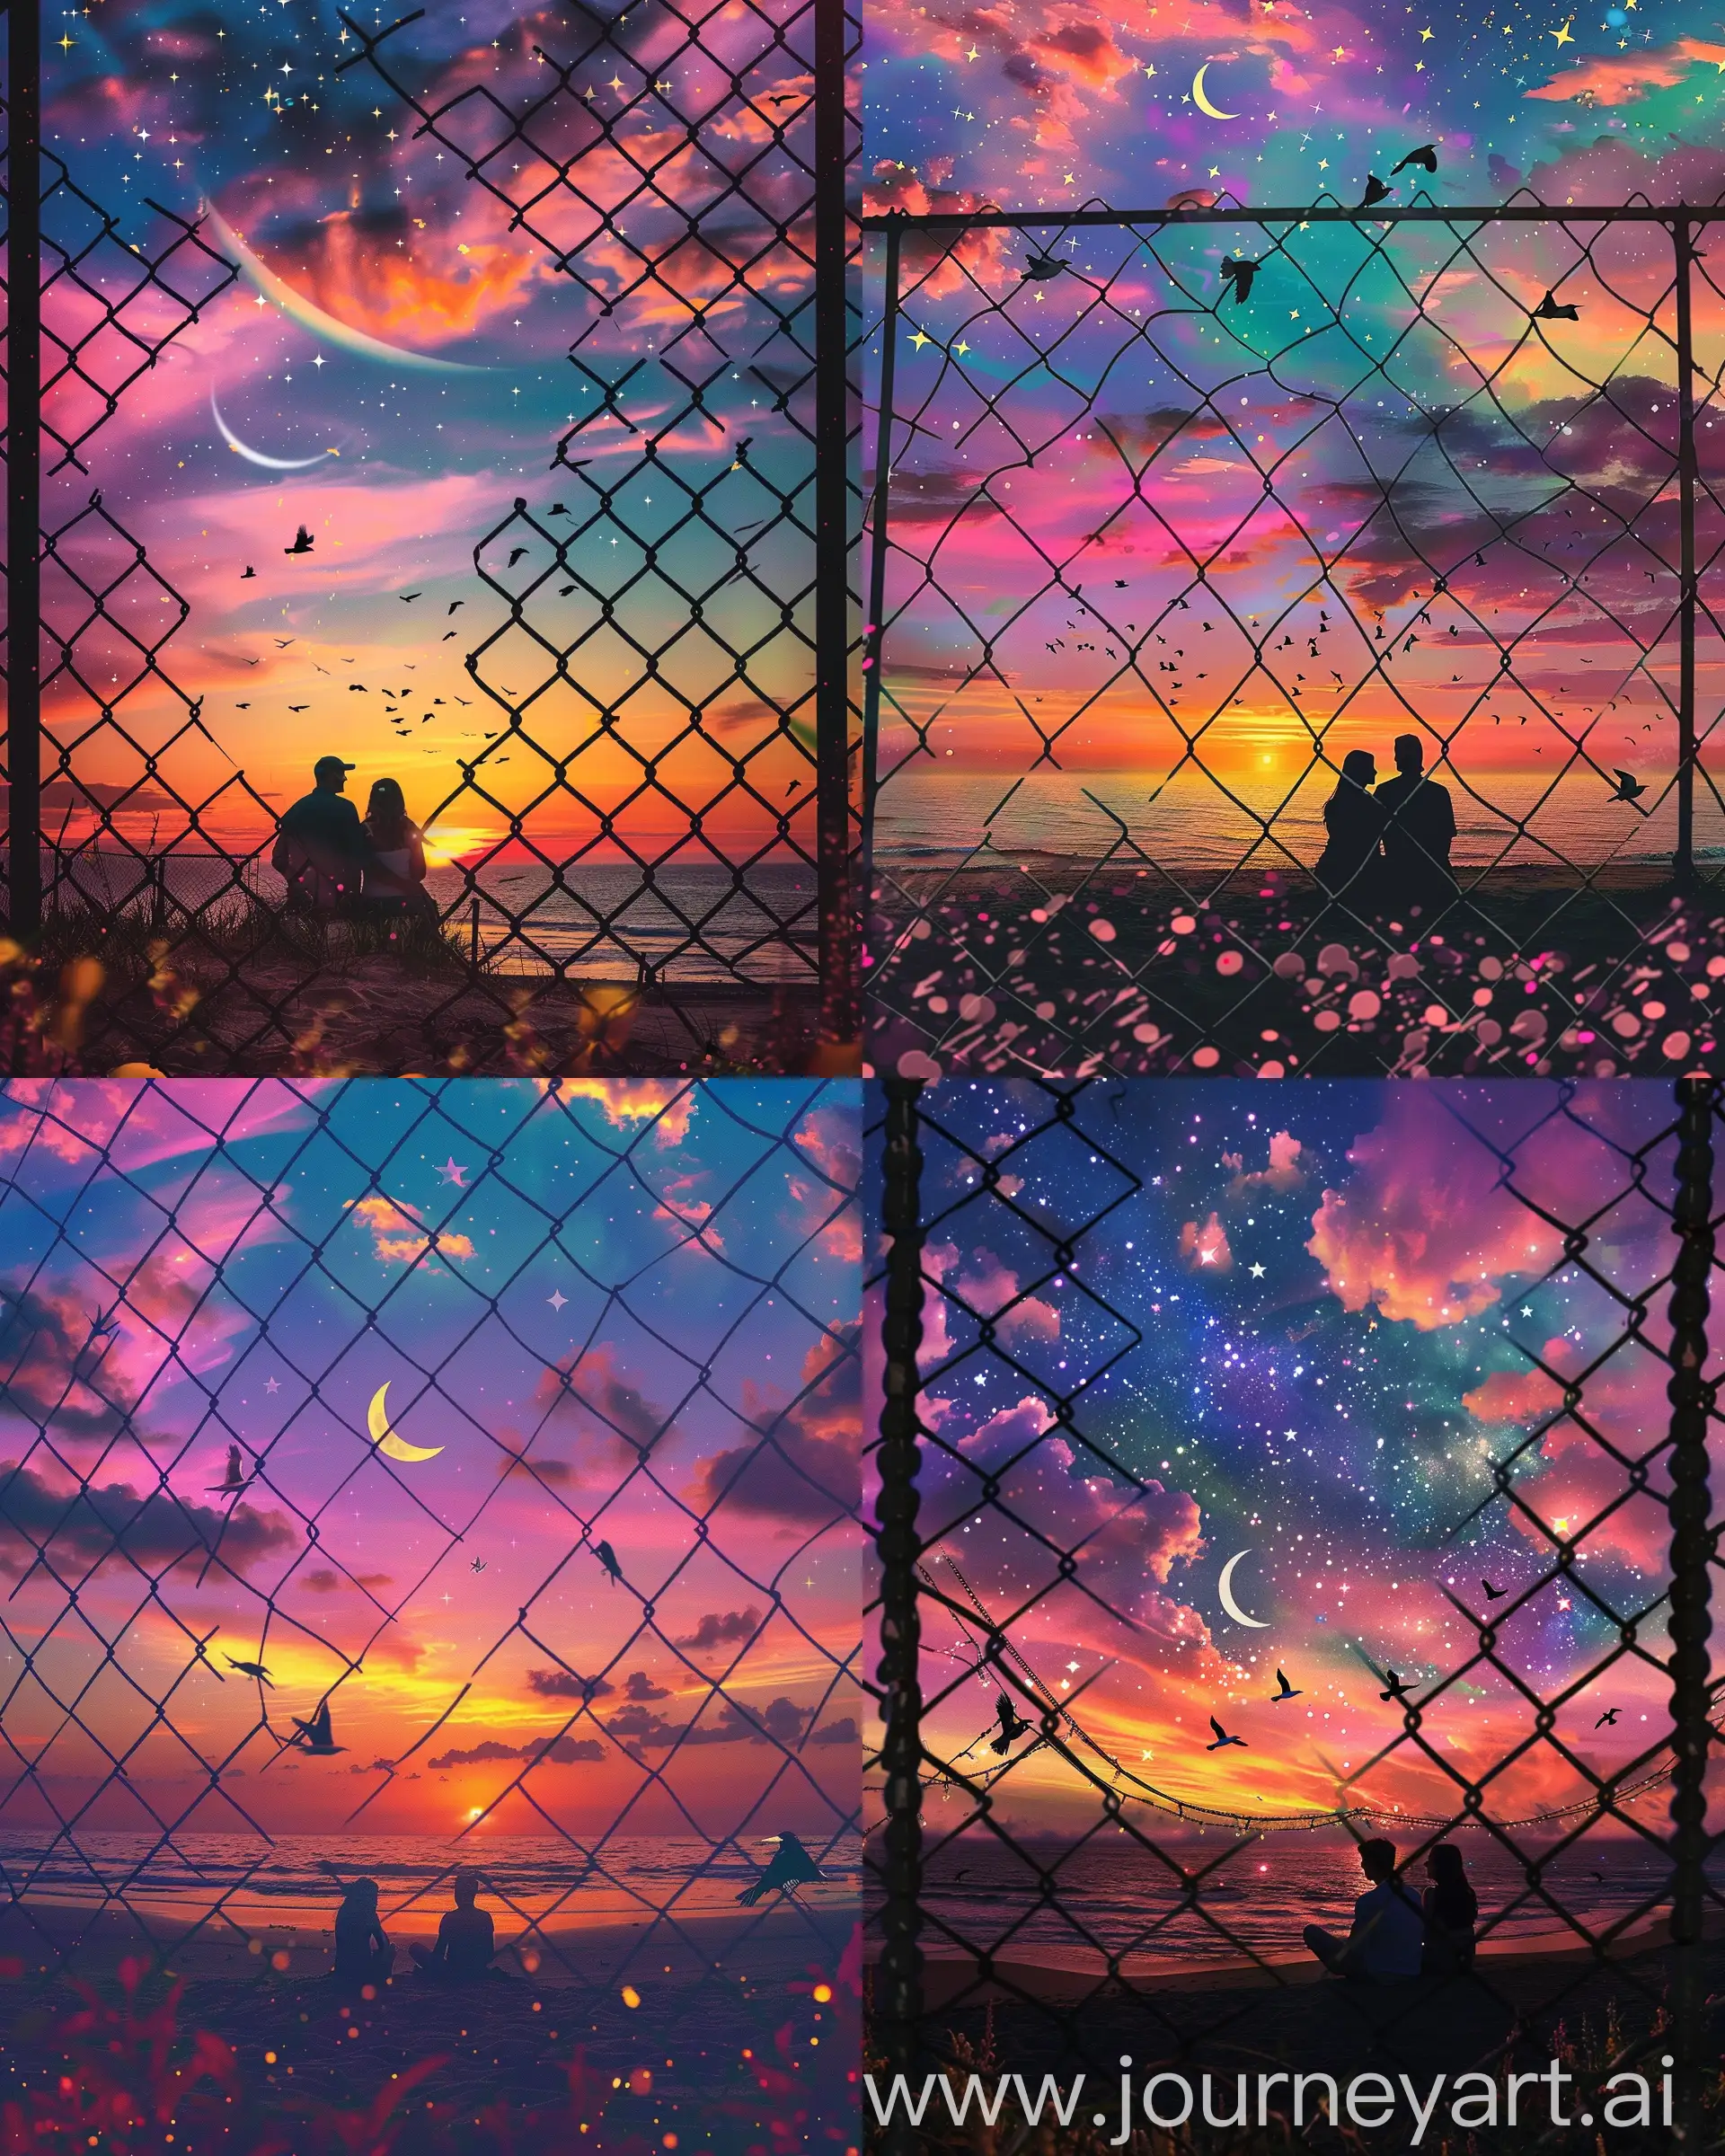 Romantic-Sunset-Beach-Scene-with-Chain-Link-Fence-Silhouette